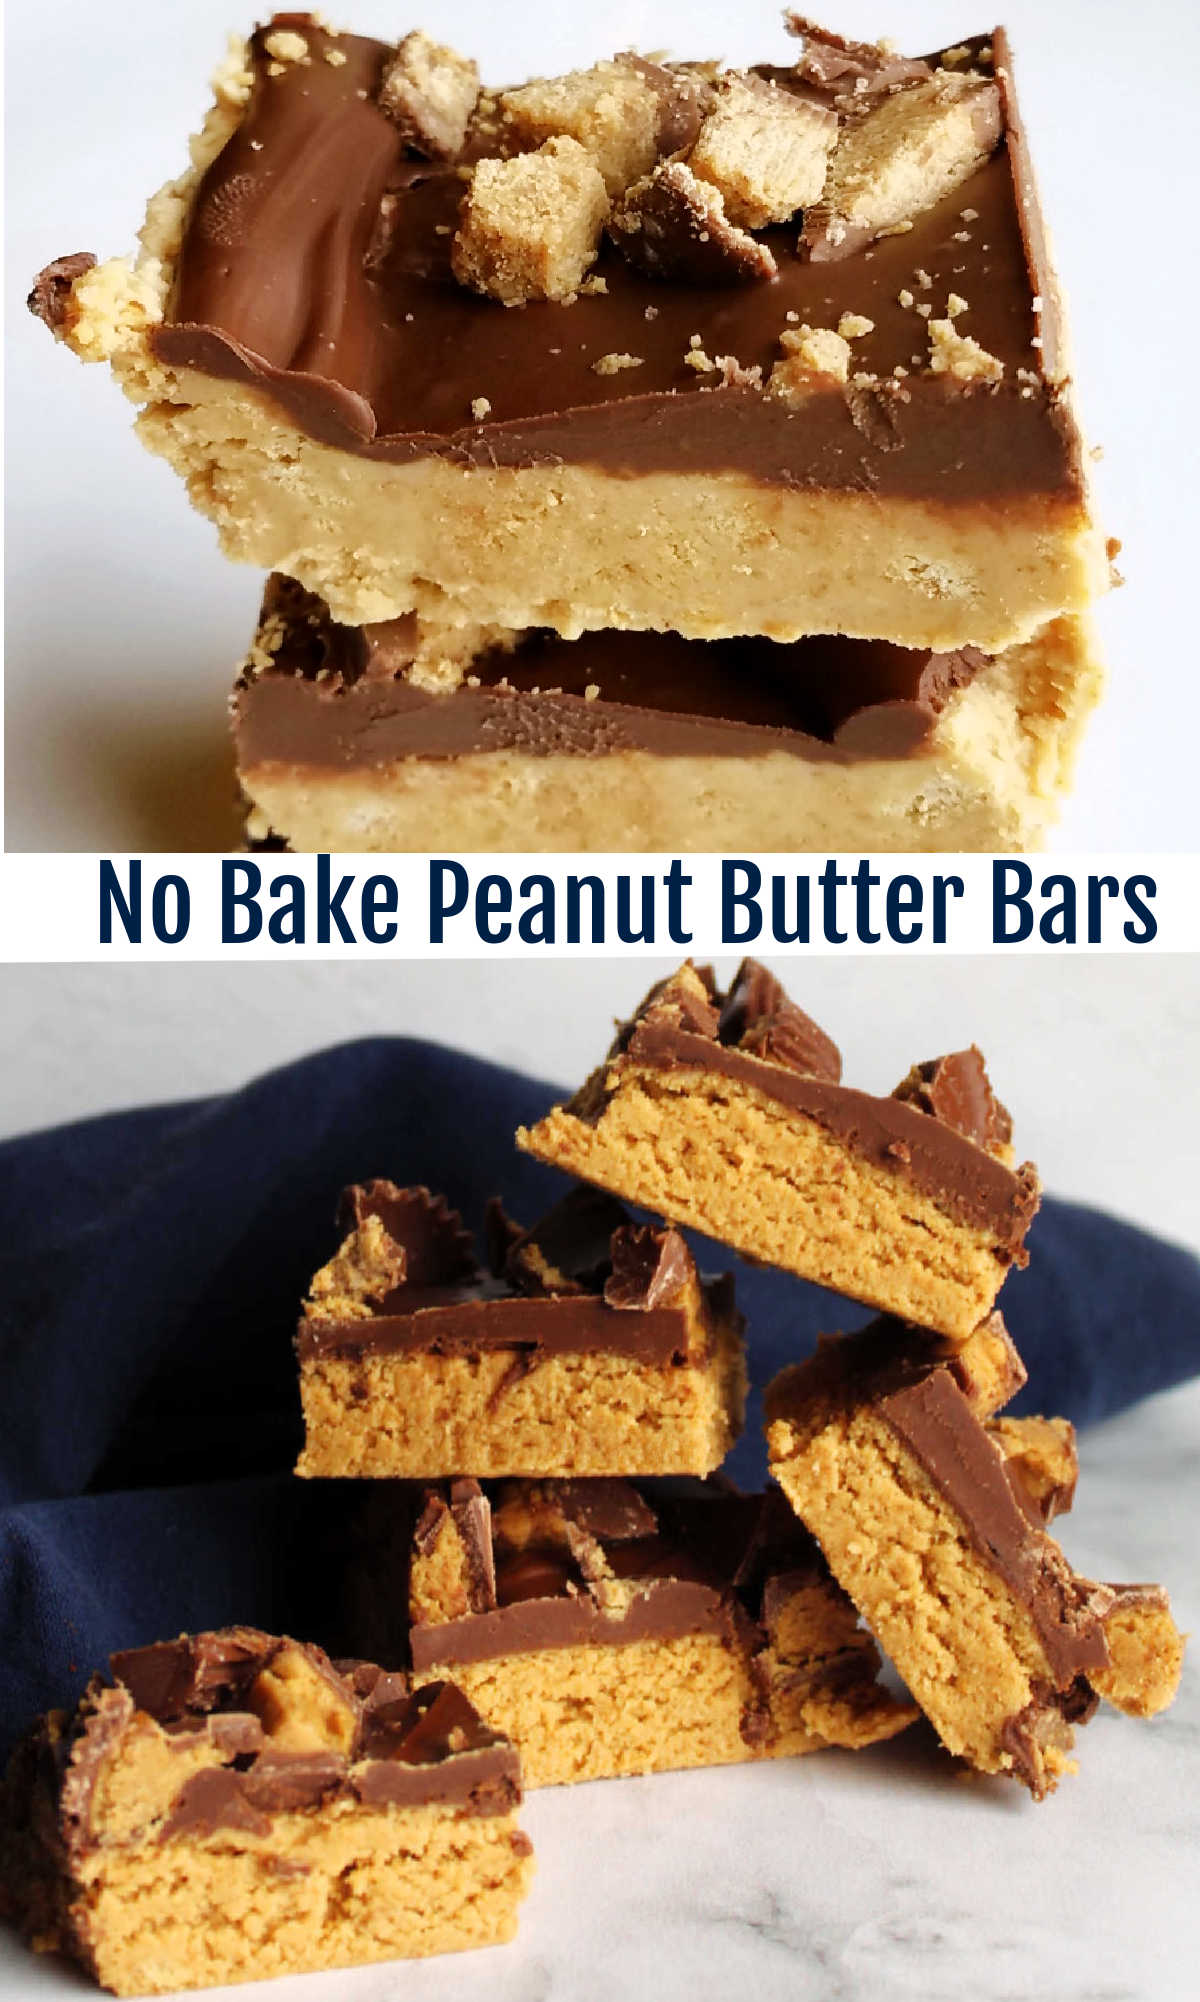 Peanut butter, graham crackers and chocolate come together in a fun no bake bar.  These fun treats are sure to get rave reviews everywhere you take them.  They are so easy to put together they are likely to become your new go to dessert!